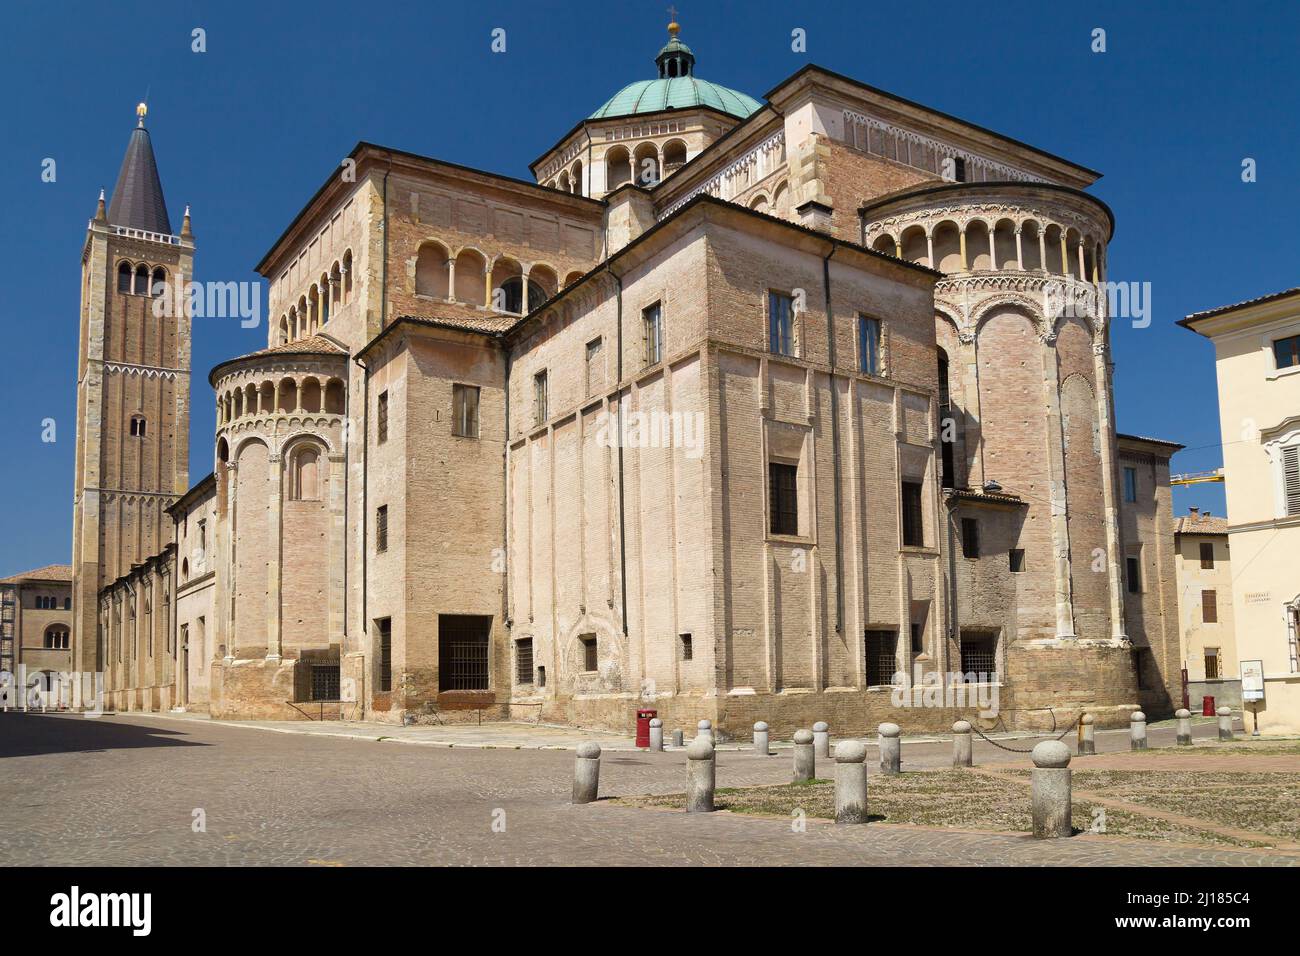 Rear view of the Cathedral of Santa Maria Assunta in Parma, Italy. Stock Photo